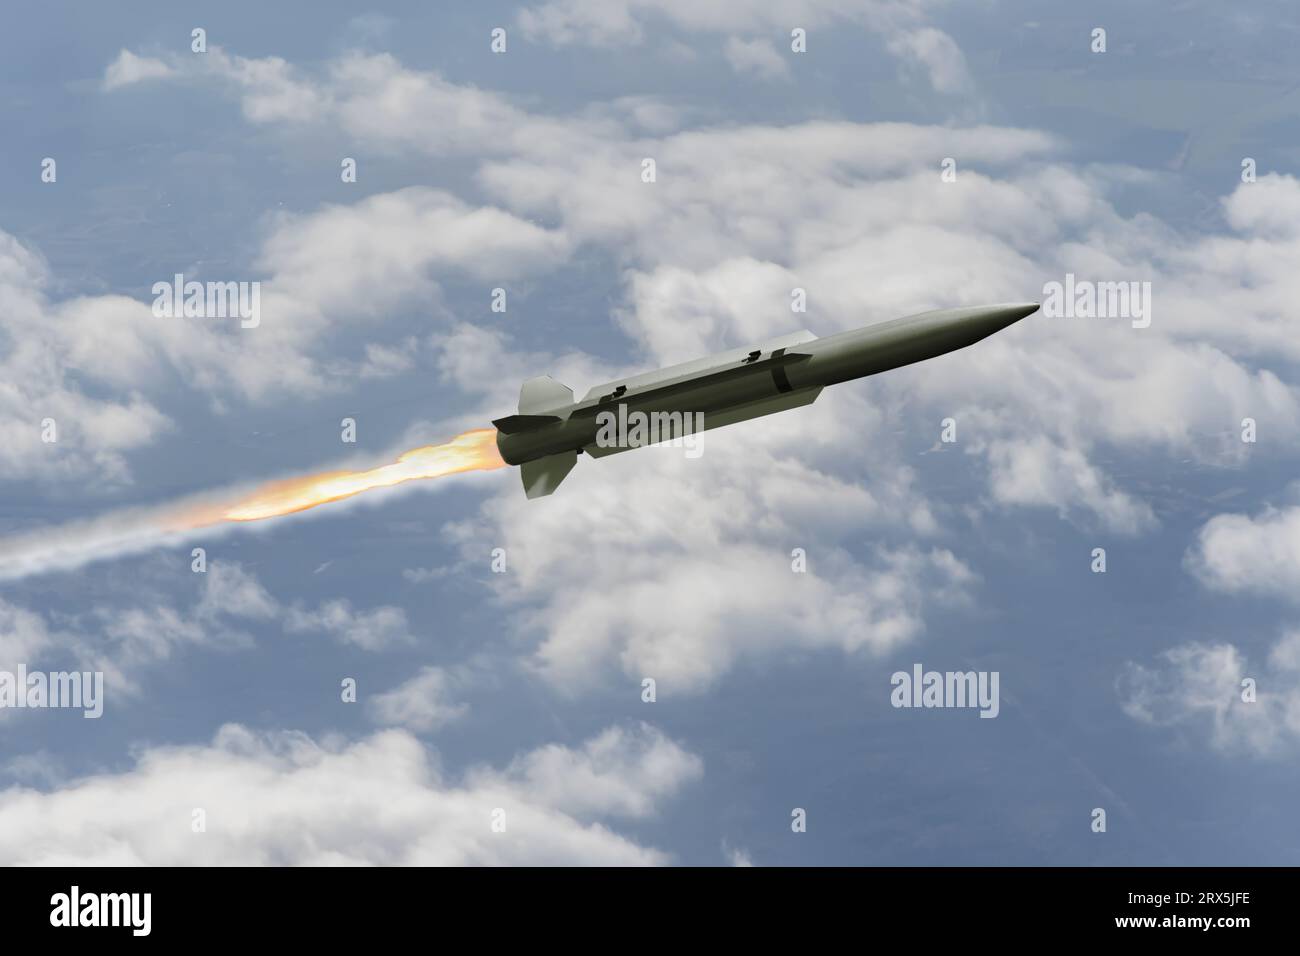 Anti-aircraft missile in the sky above the clouds, missile launch trace, 3d rendering. Concept: war in Ukraine, anti-aircraft defense by military comp Stock Photo